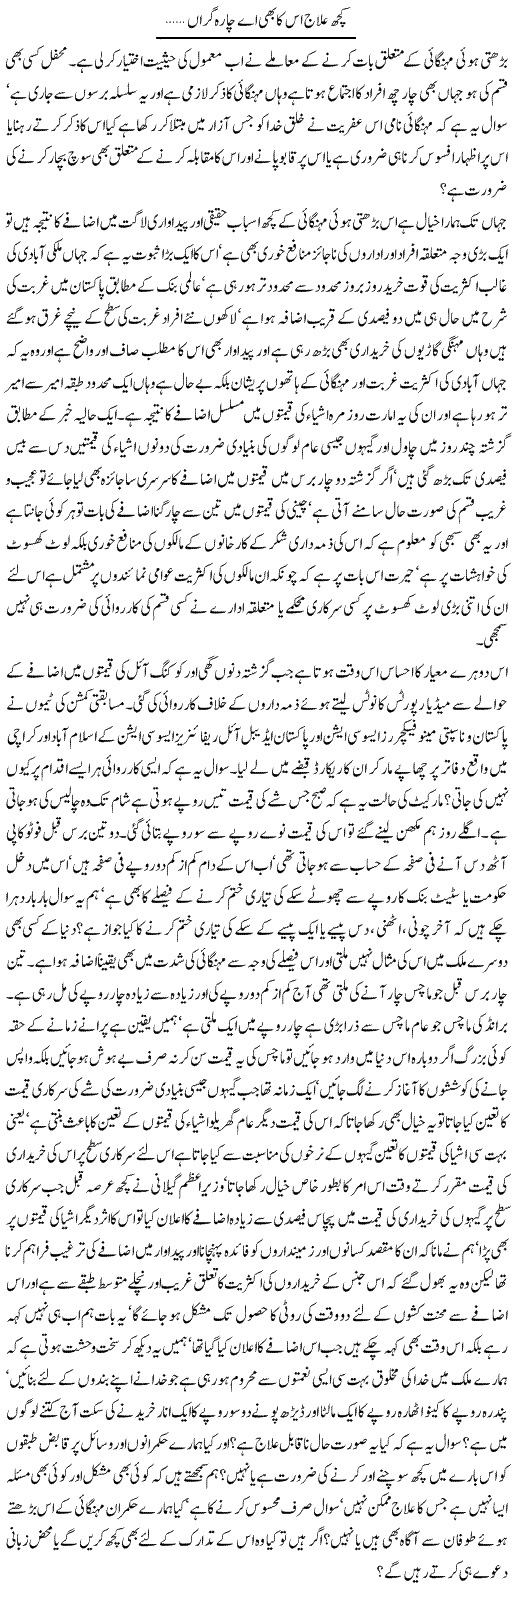 Increasing Inflation Express Column Hameed Akhtar 26 February 2011